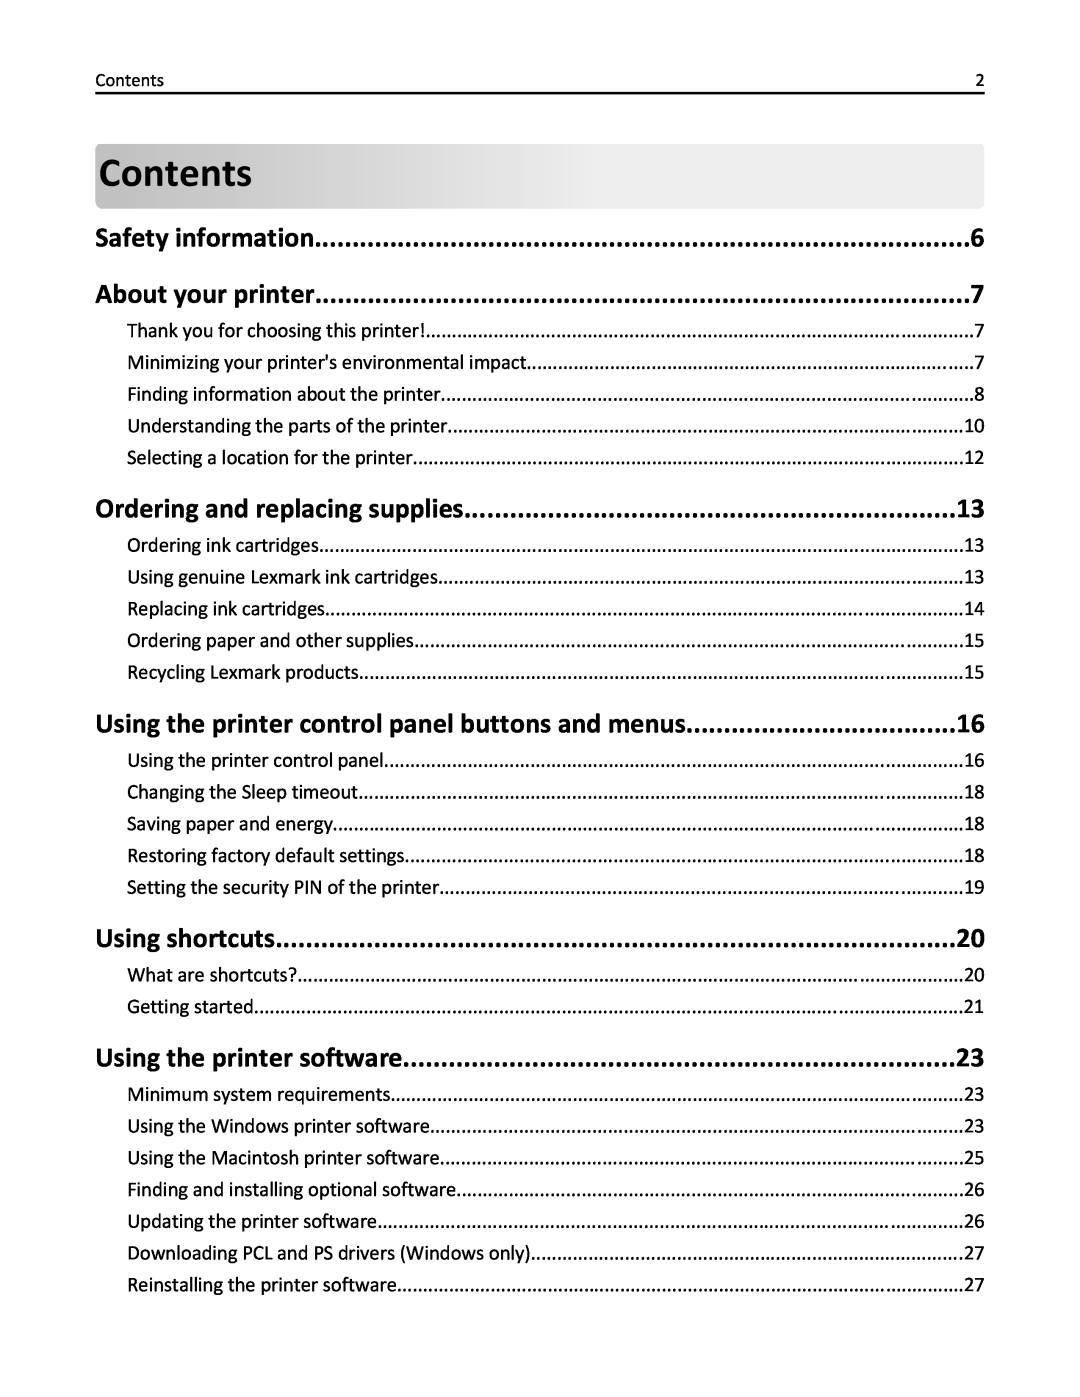 Lexmark 90P3000 manual Contents, Safety information, About your printer, Ordering and replacing supplies, Using shortcuts 